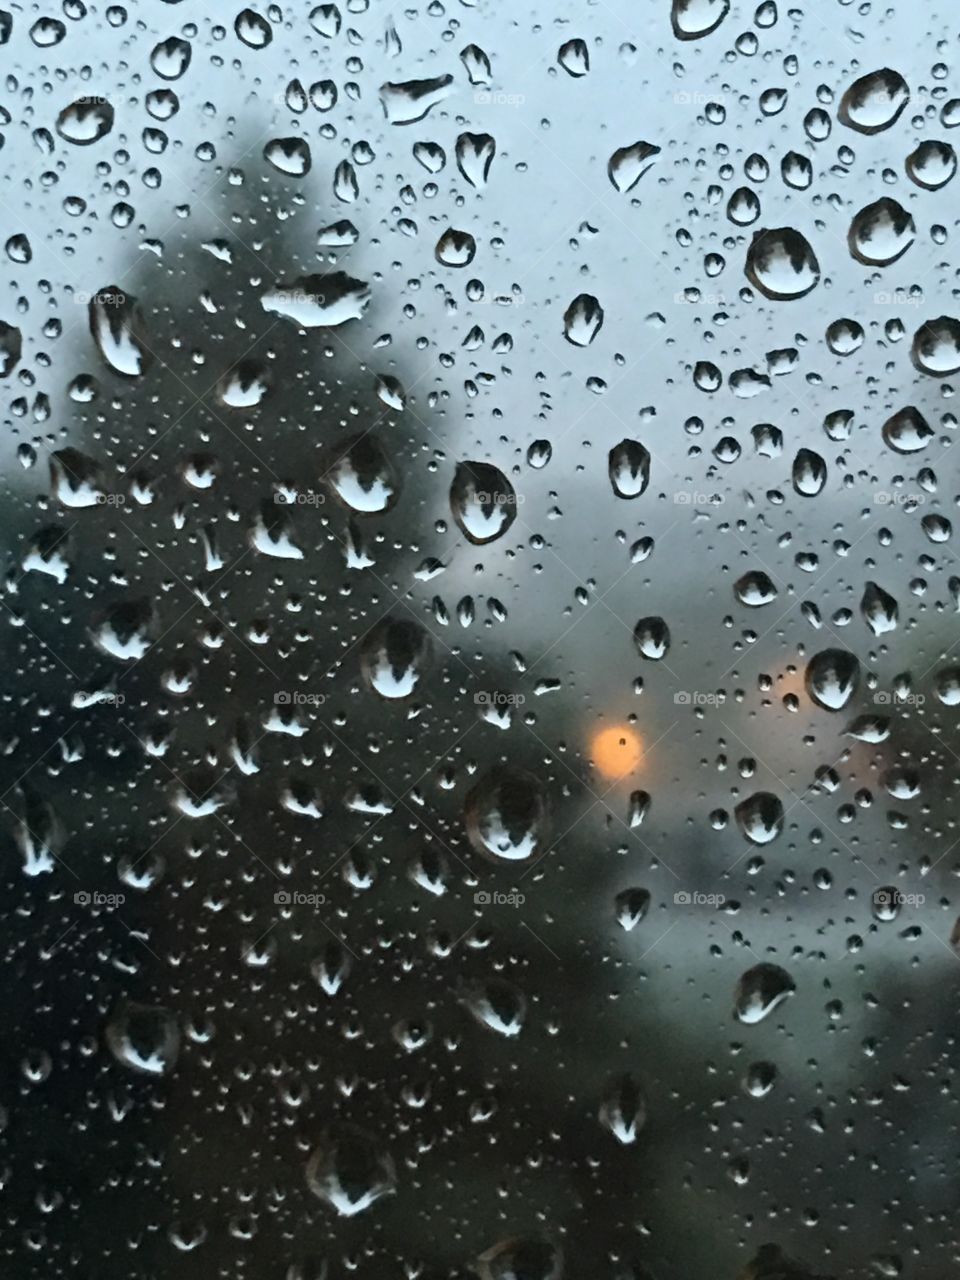 Focused on the droplets on the window with landscape in the perspective distance.